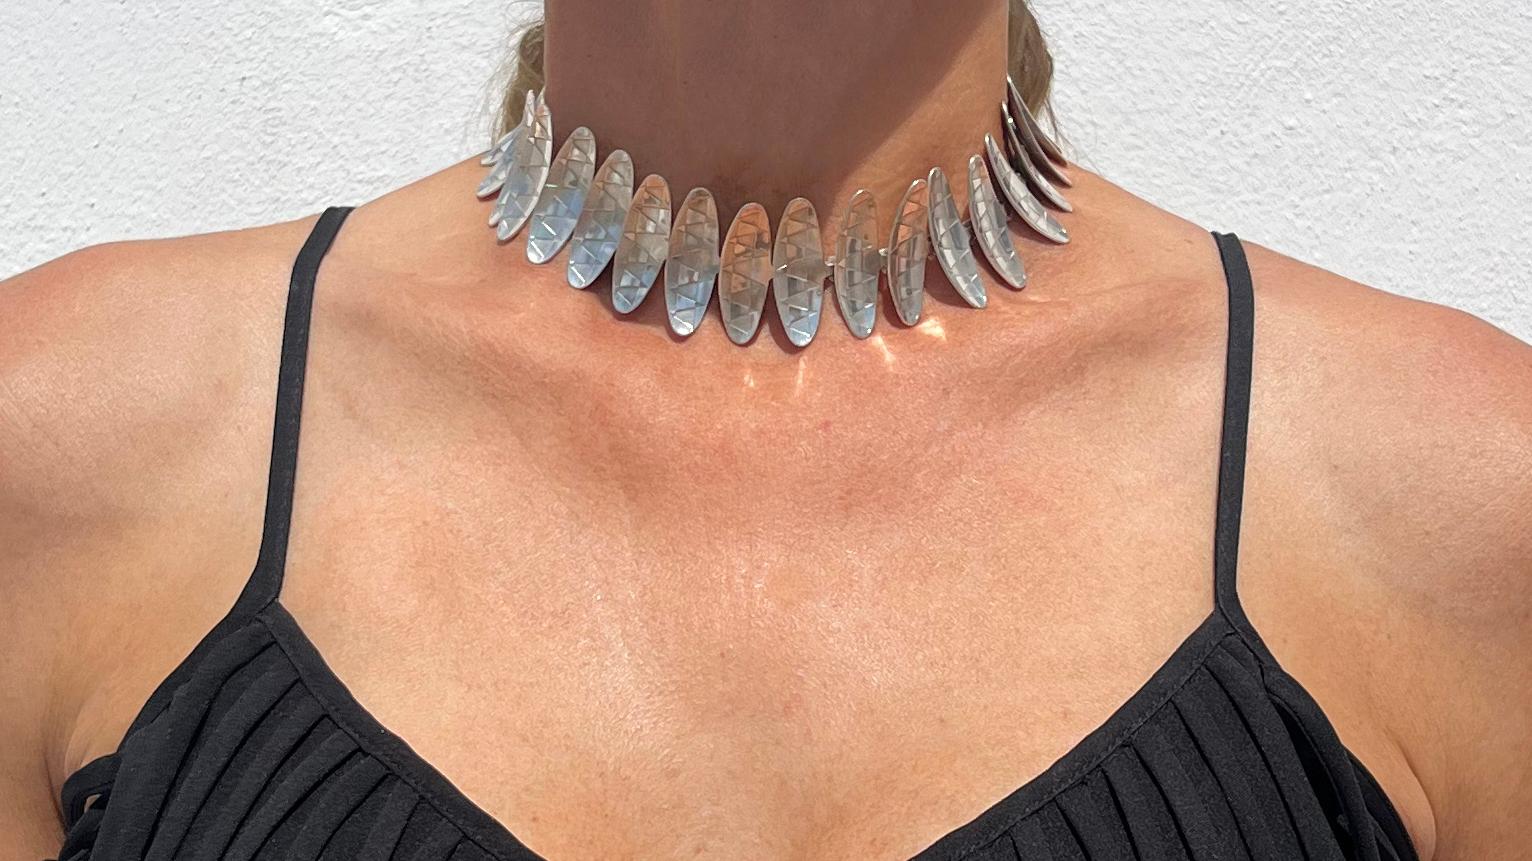 This sterling silver necklace are made out of something that looks like silver patterned shields. The shields are placed together with simple hooks and the necklace also closes easily with one.

The necklace is a so called choker, meaning a necklace